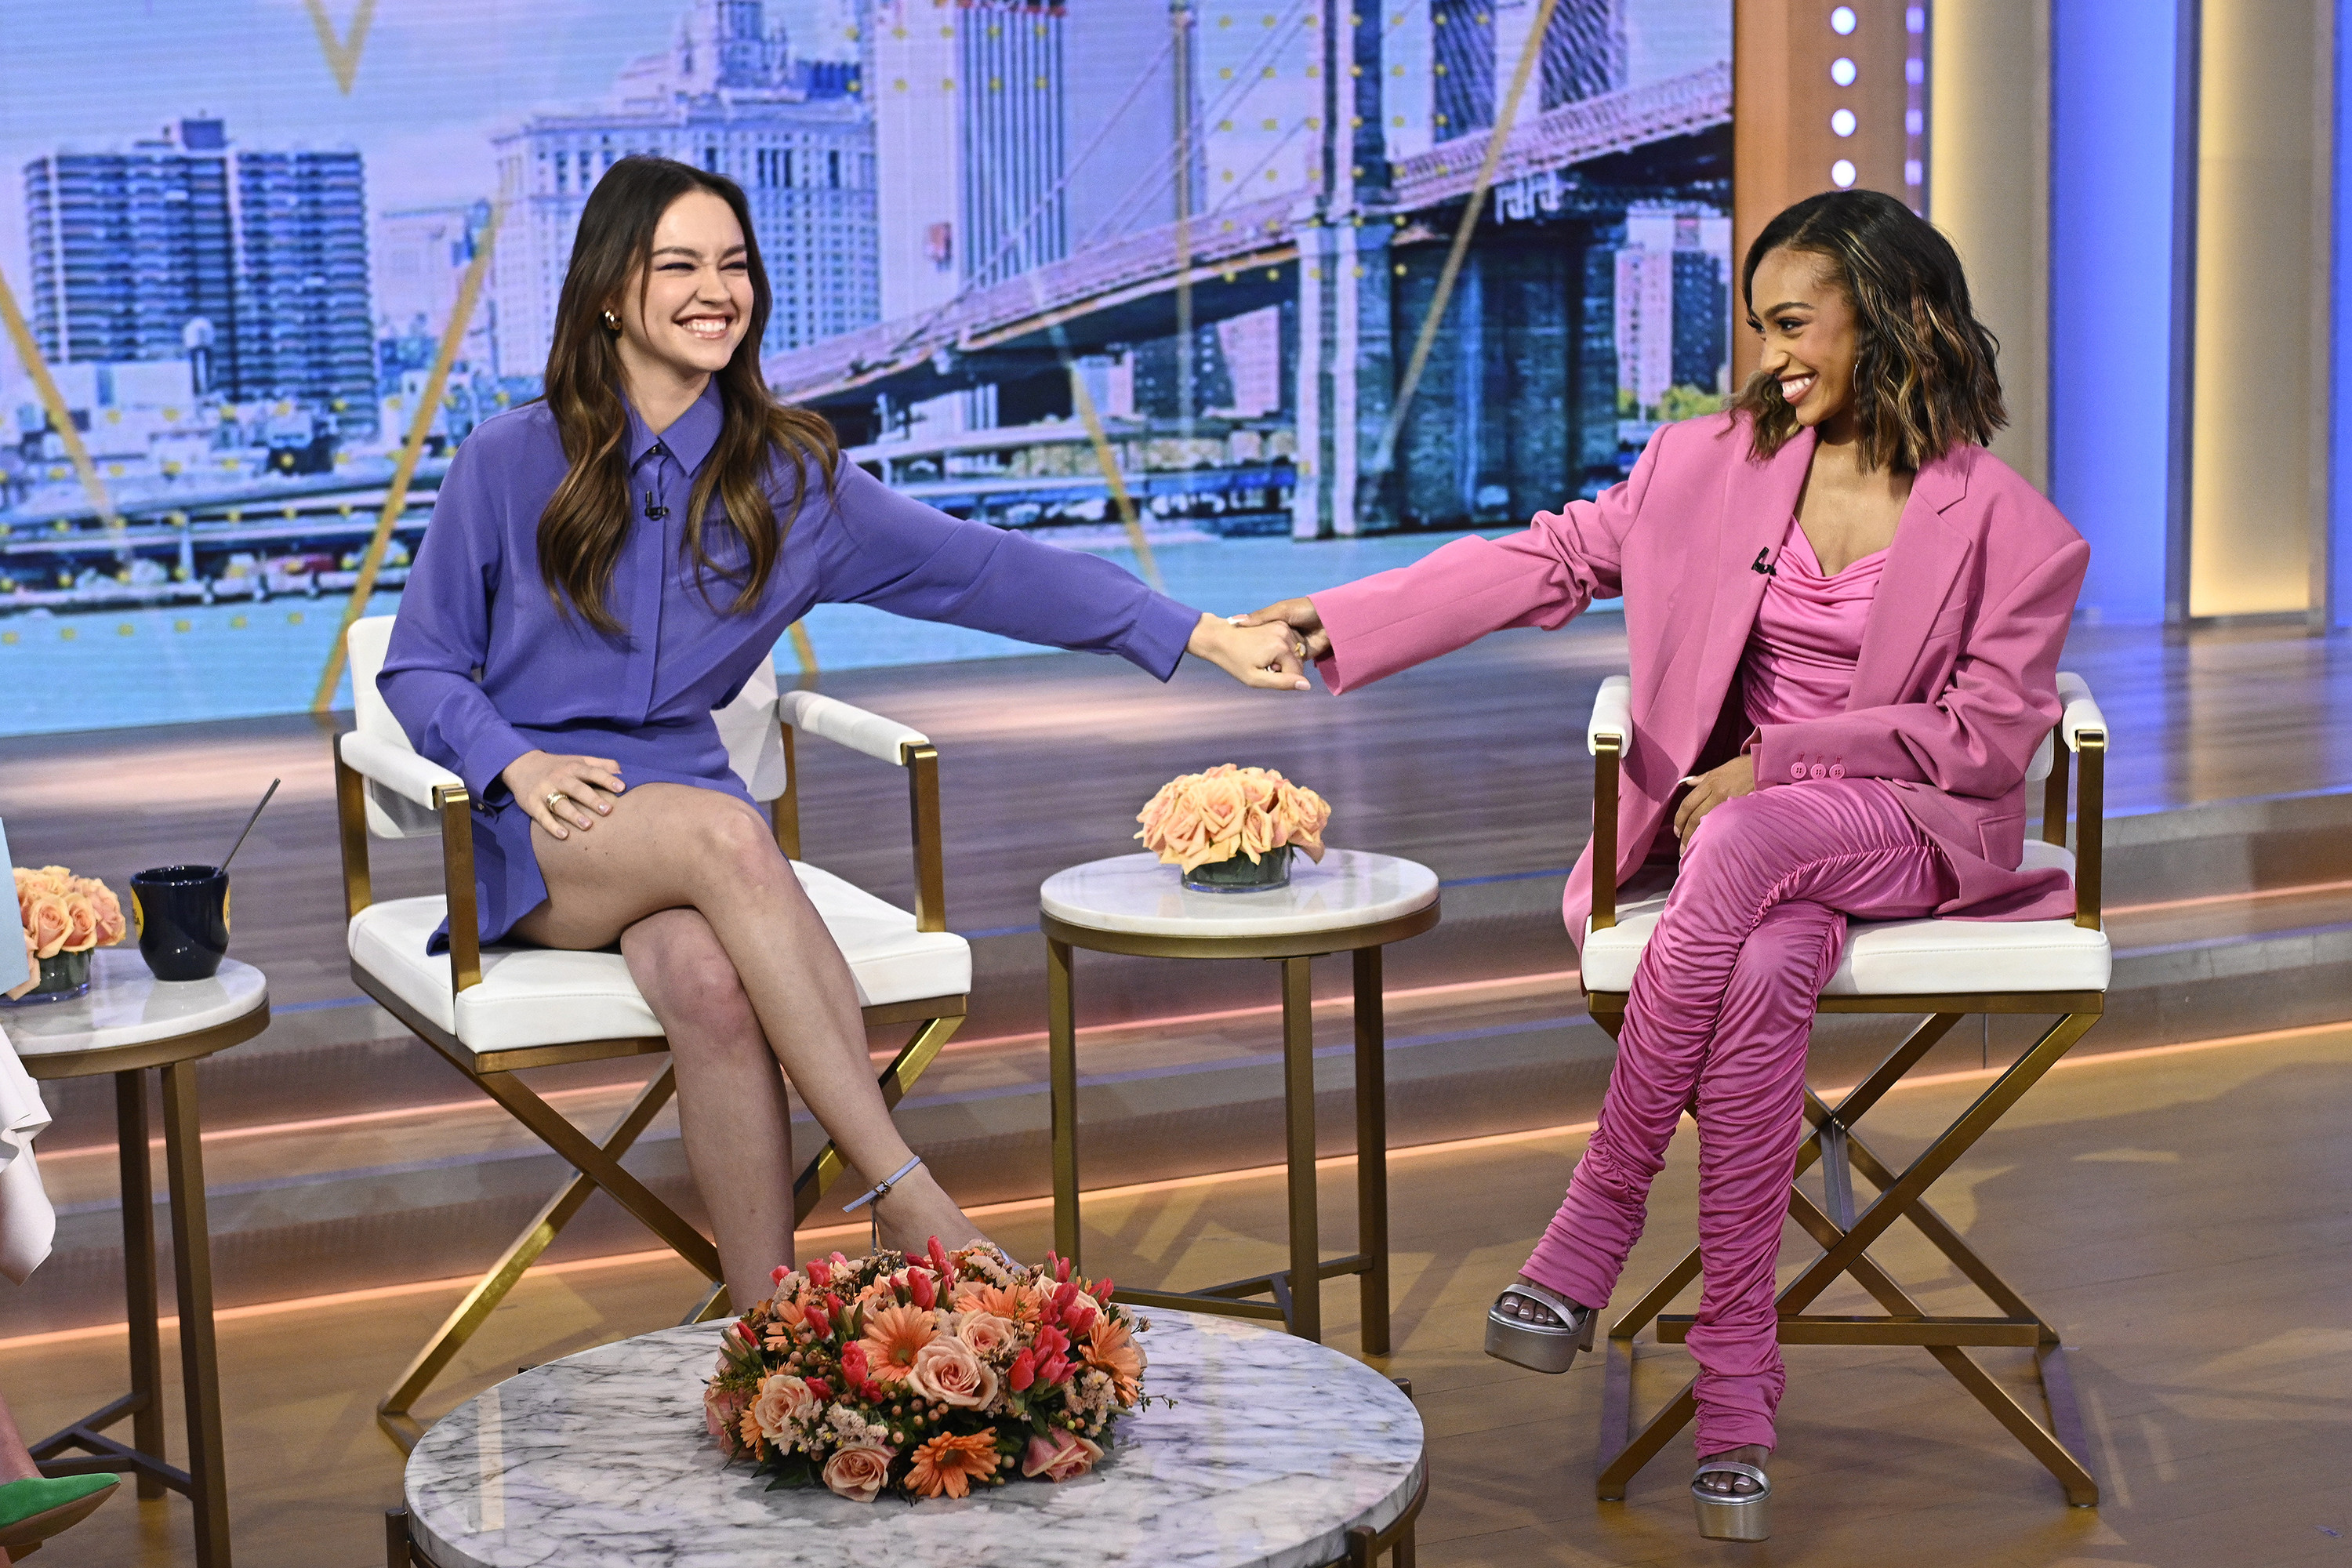 Sadie Stanley and Lexi Underwood on "Good Morning America" on Thursday, June 8, 2023. | Source: Getty Images